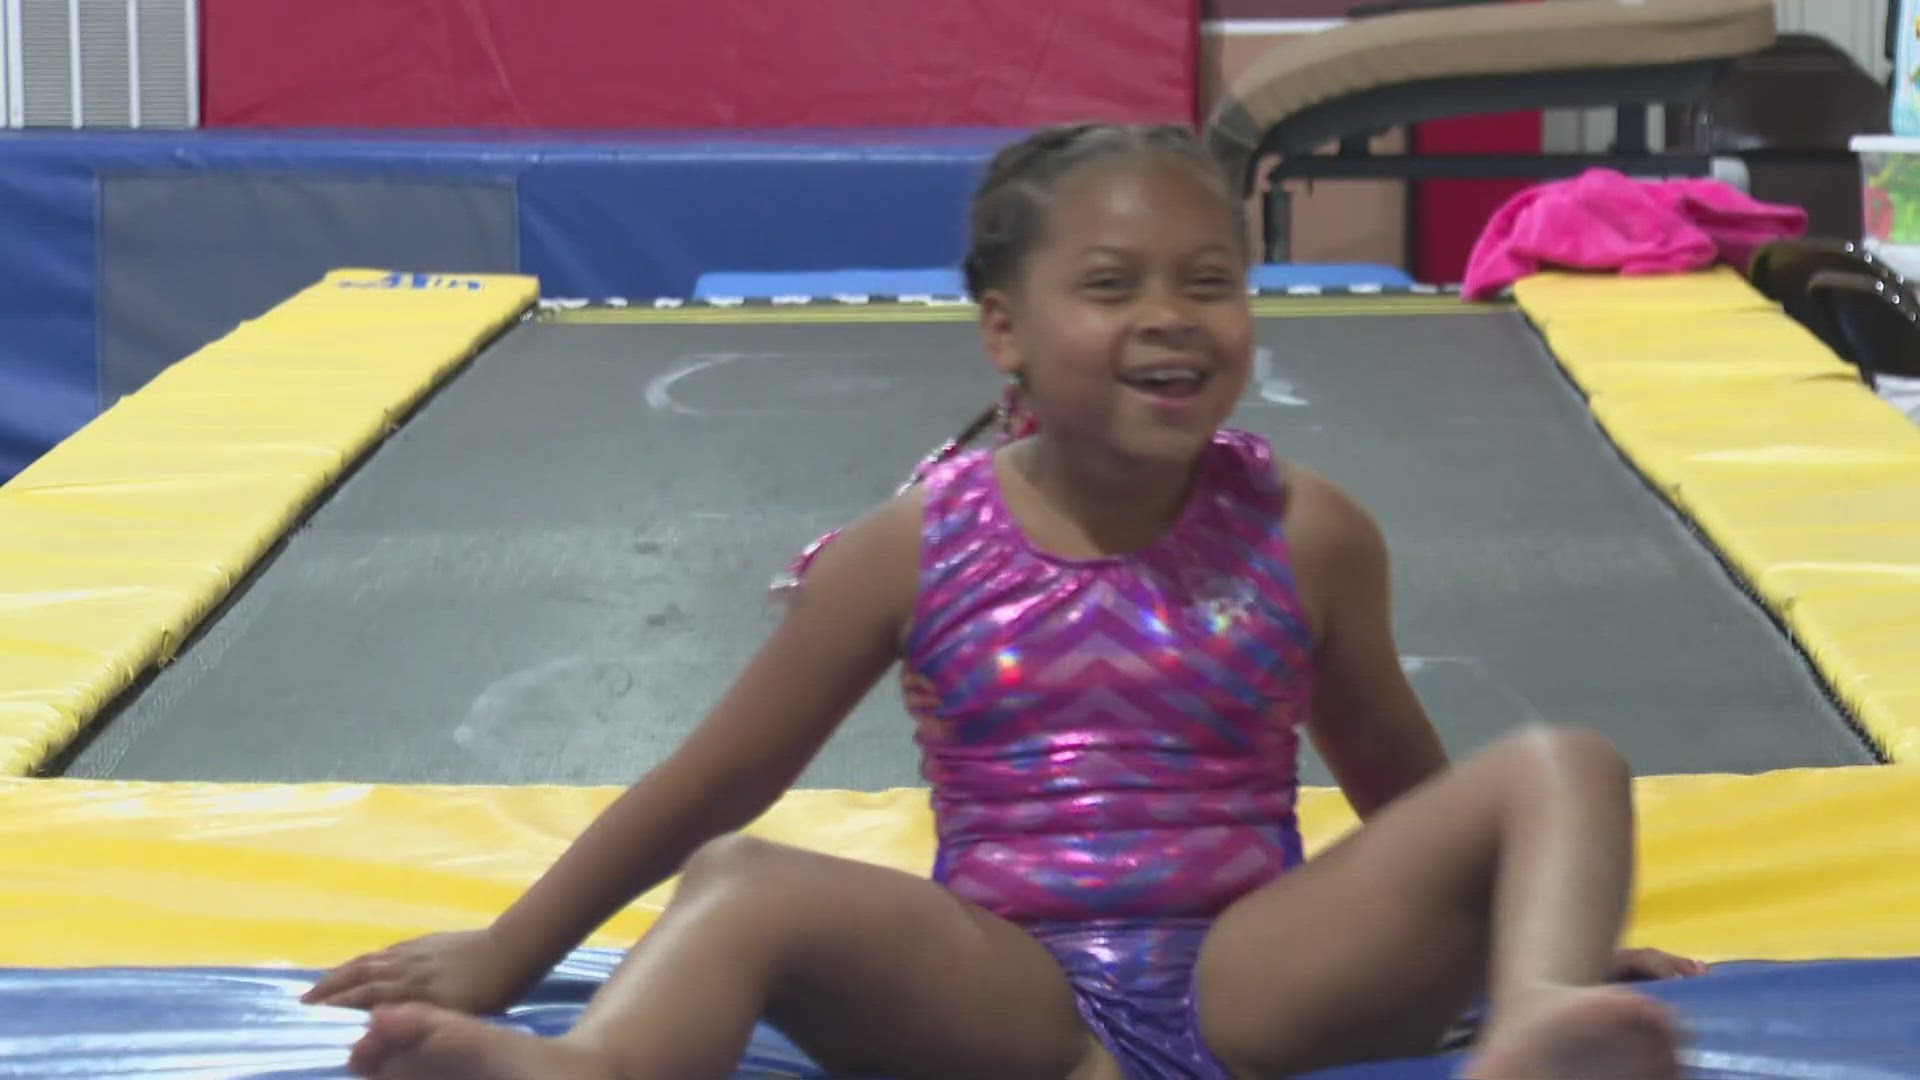 A Thomasville girl dreams of being a gymnast but battles epilepsy. The Make-A-Wish Foundation stepped in to help her go after her goals.